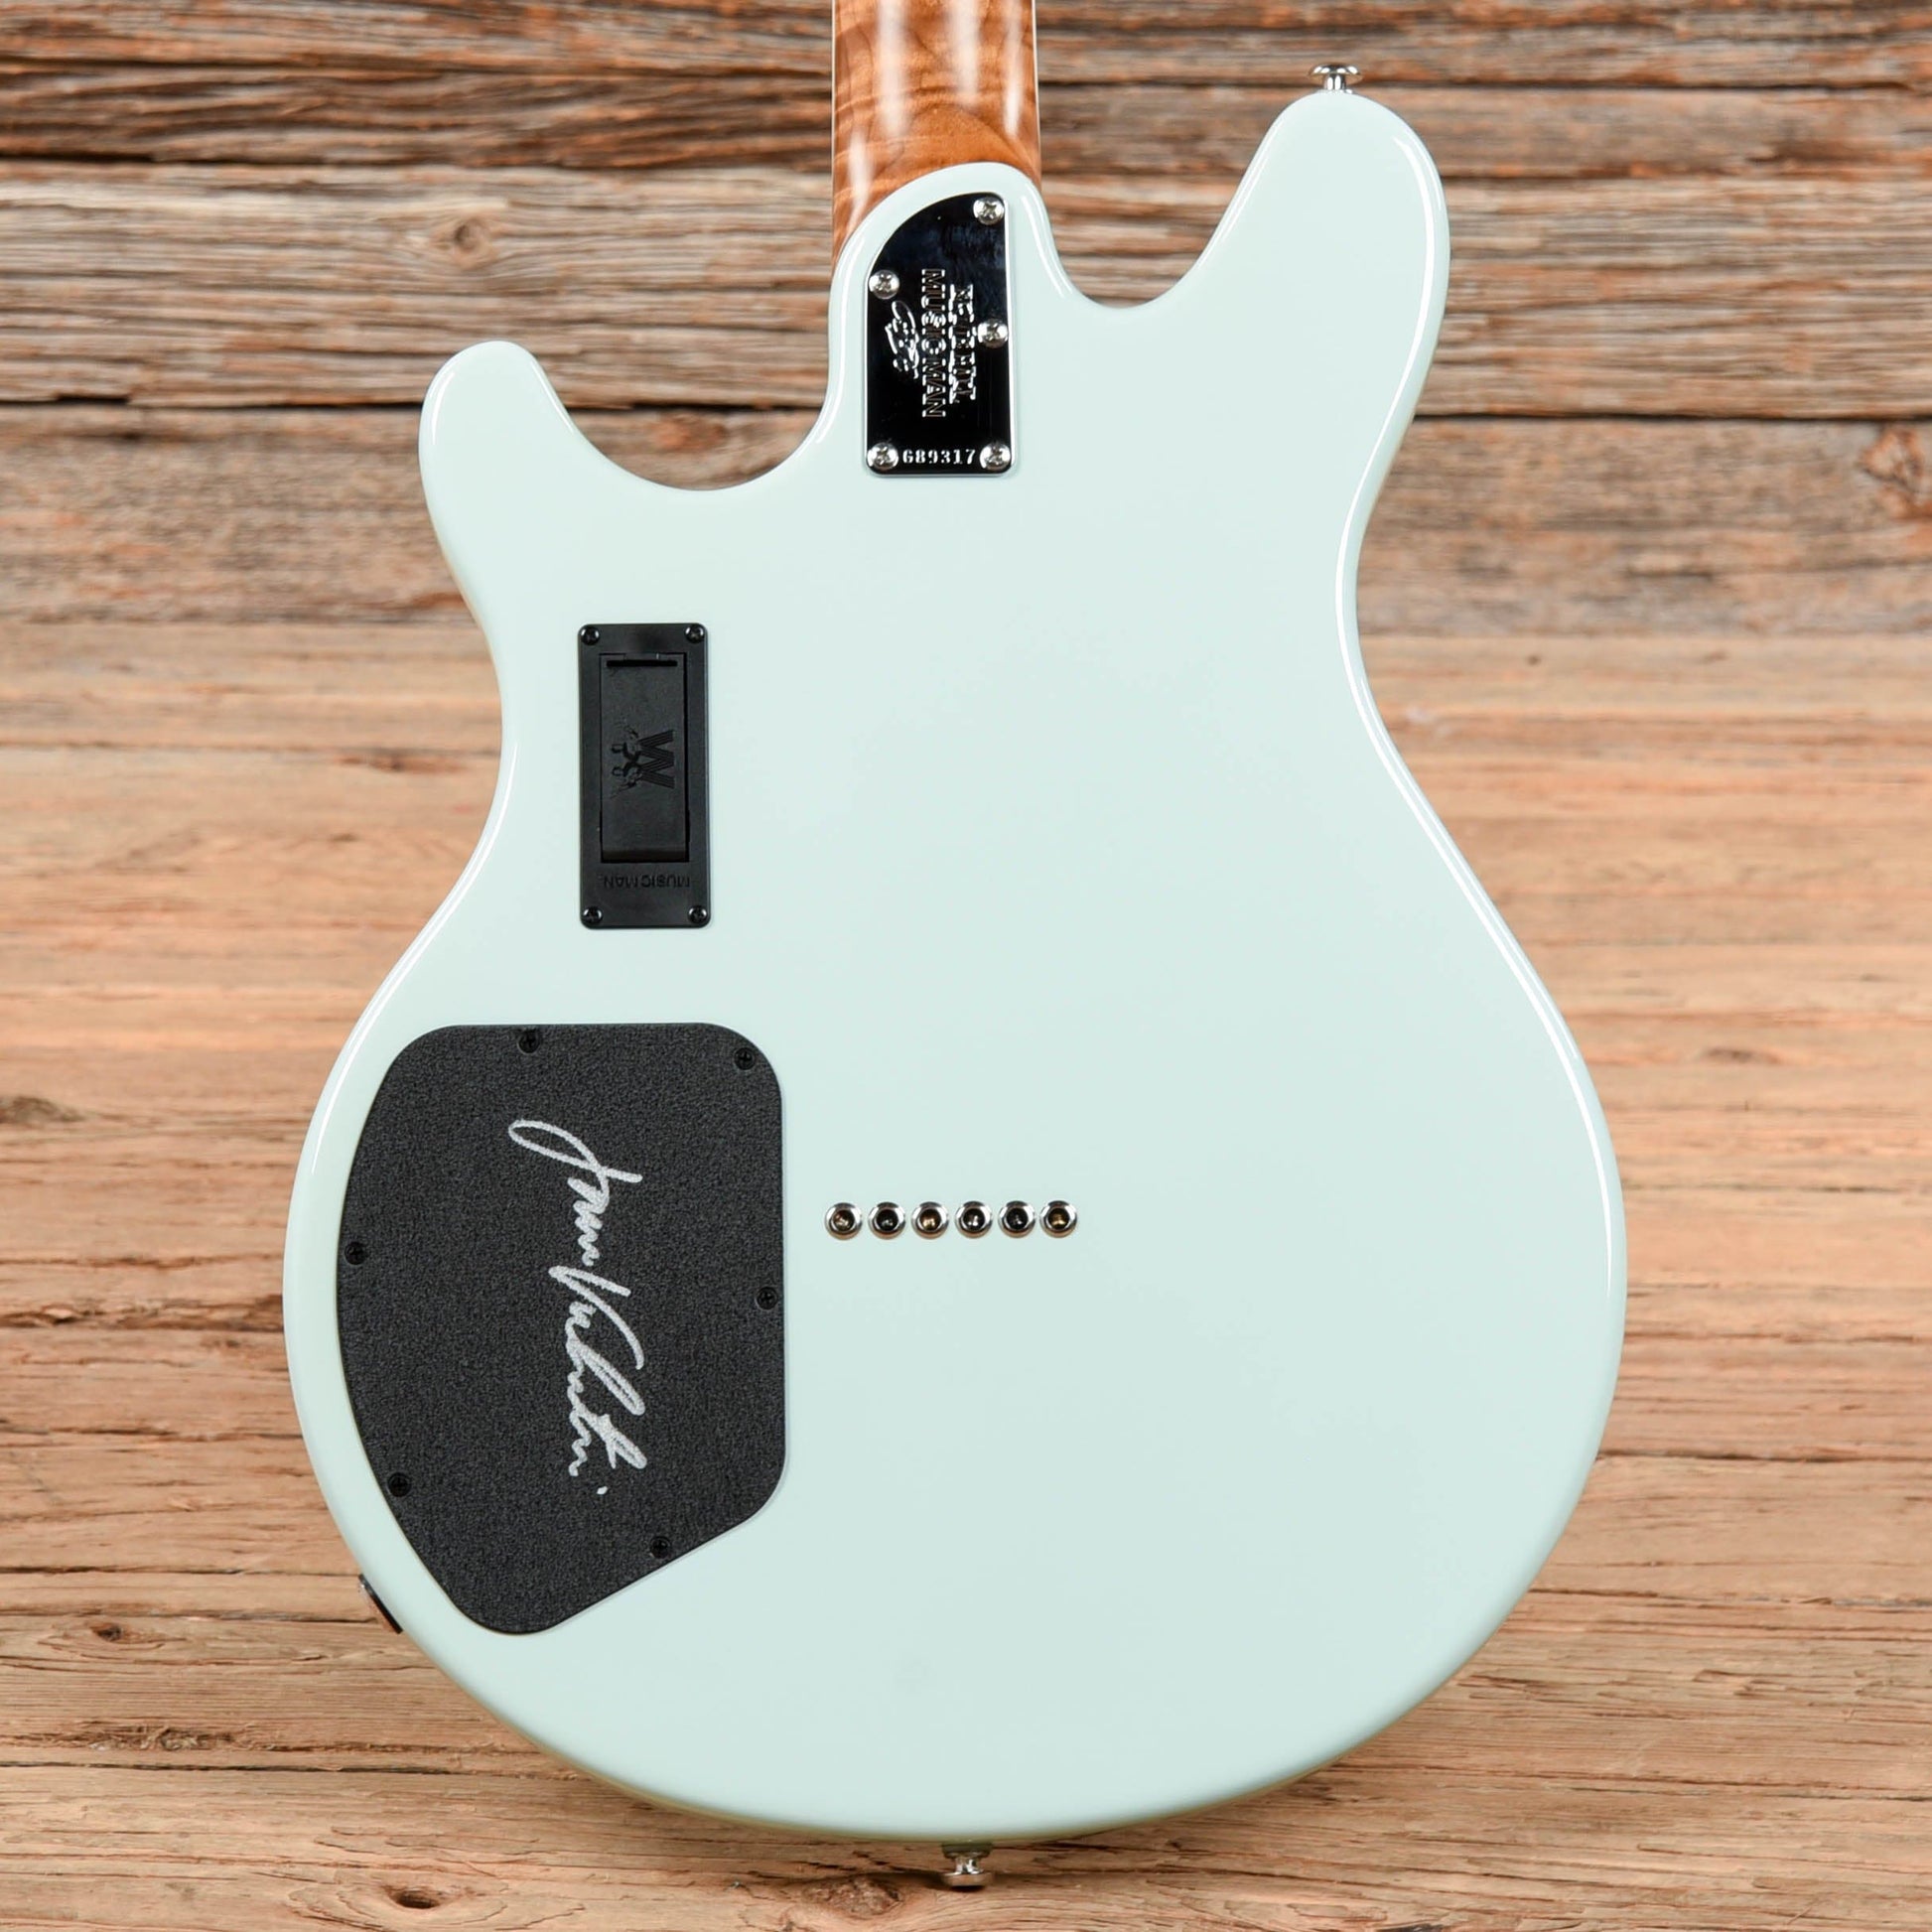 Music Man BFR James Valentine Signature Baby Blue 2019 Electric Guitars / Solid Body